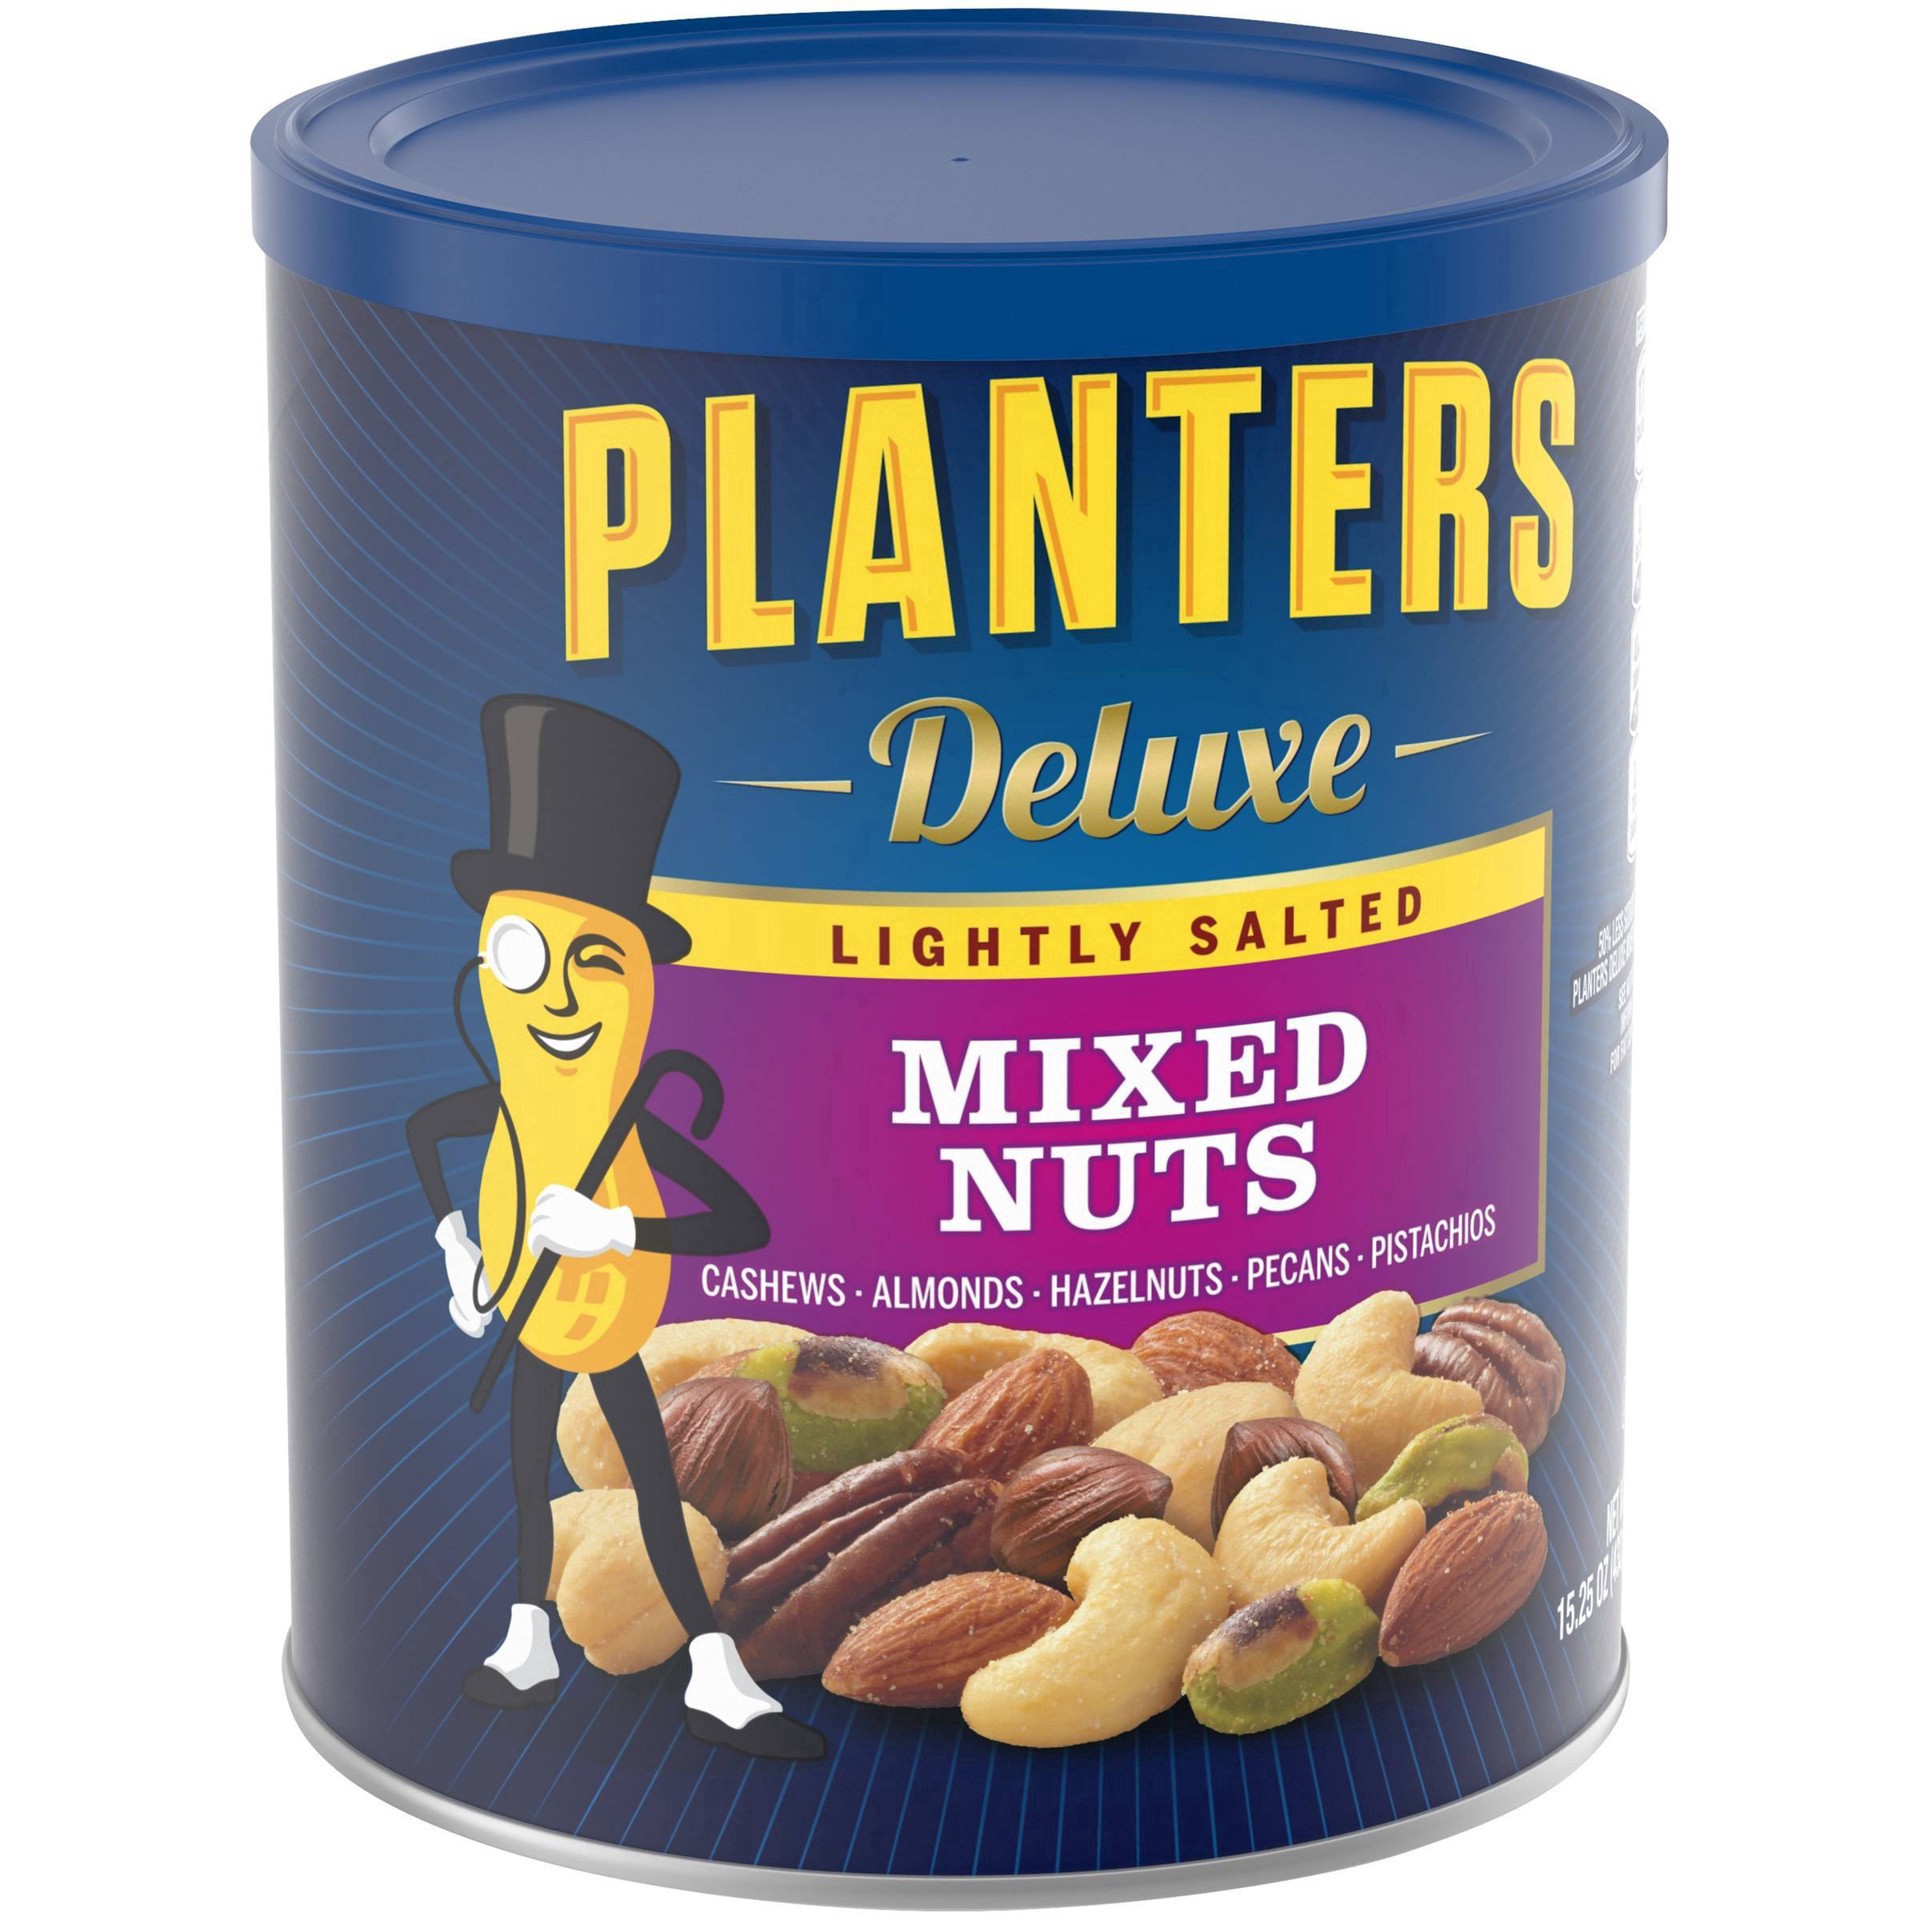 slide 46 of 46, Planters Deluxe Lightly Salted Mixed Nuts 15.25 oz, 15.25 oz